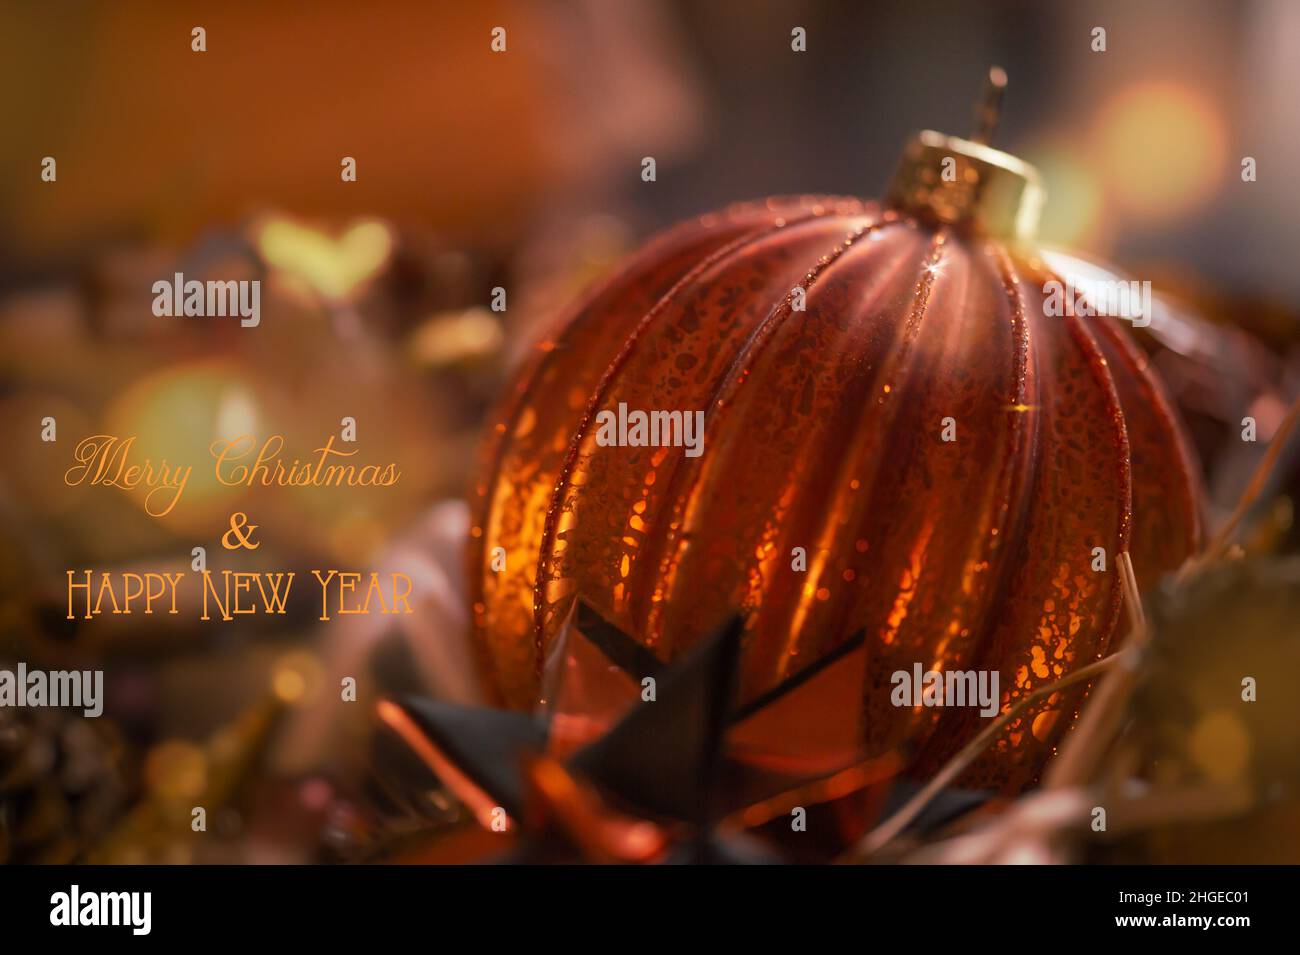 Close up of copper colored Christmas ball. Handmade crackled glass ball. English text: Merry christmas and happy new year. Stock Photo